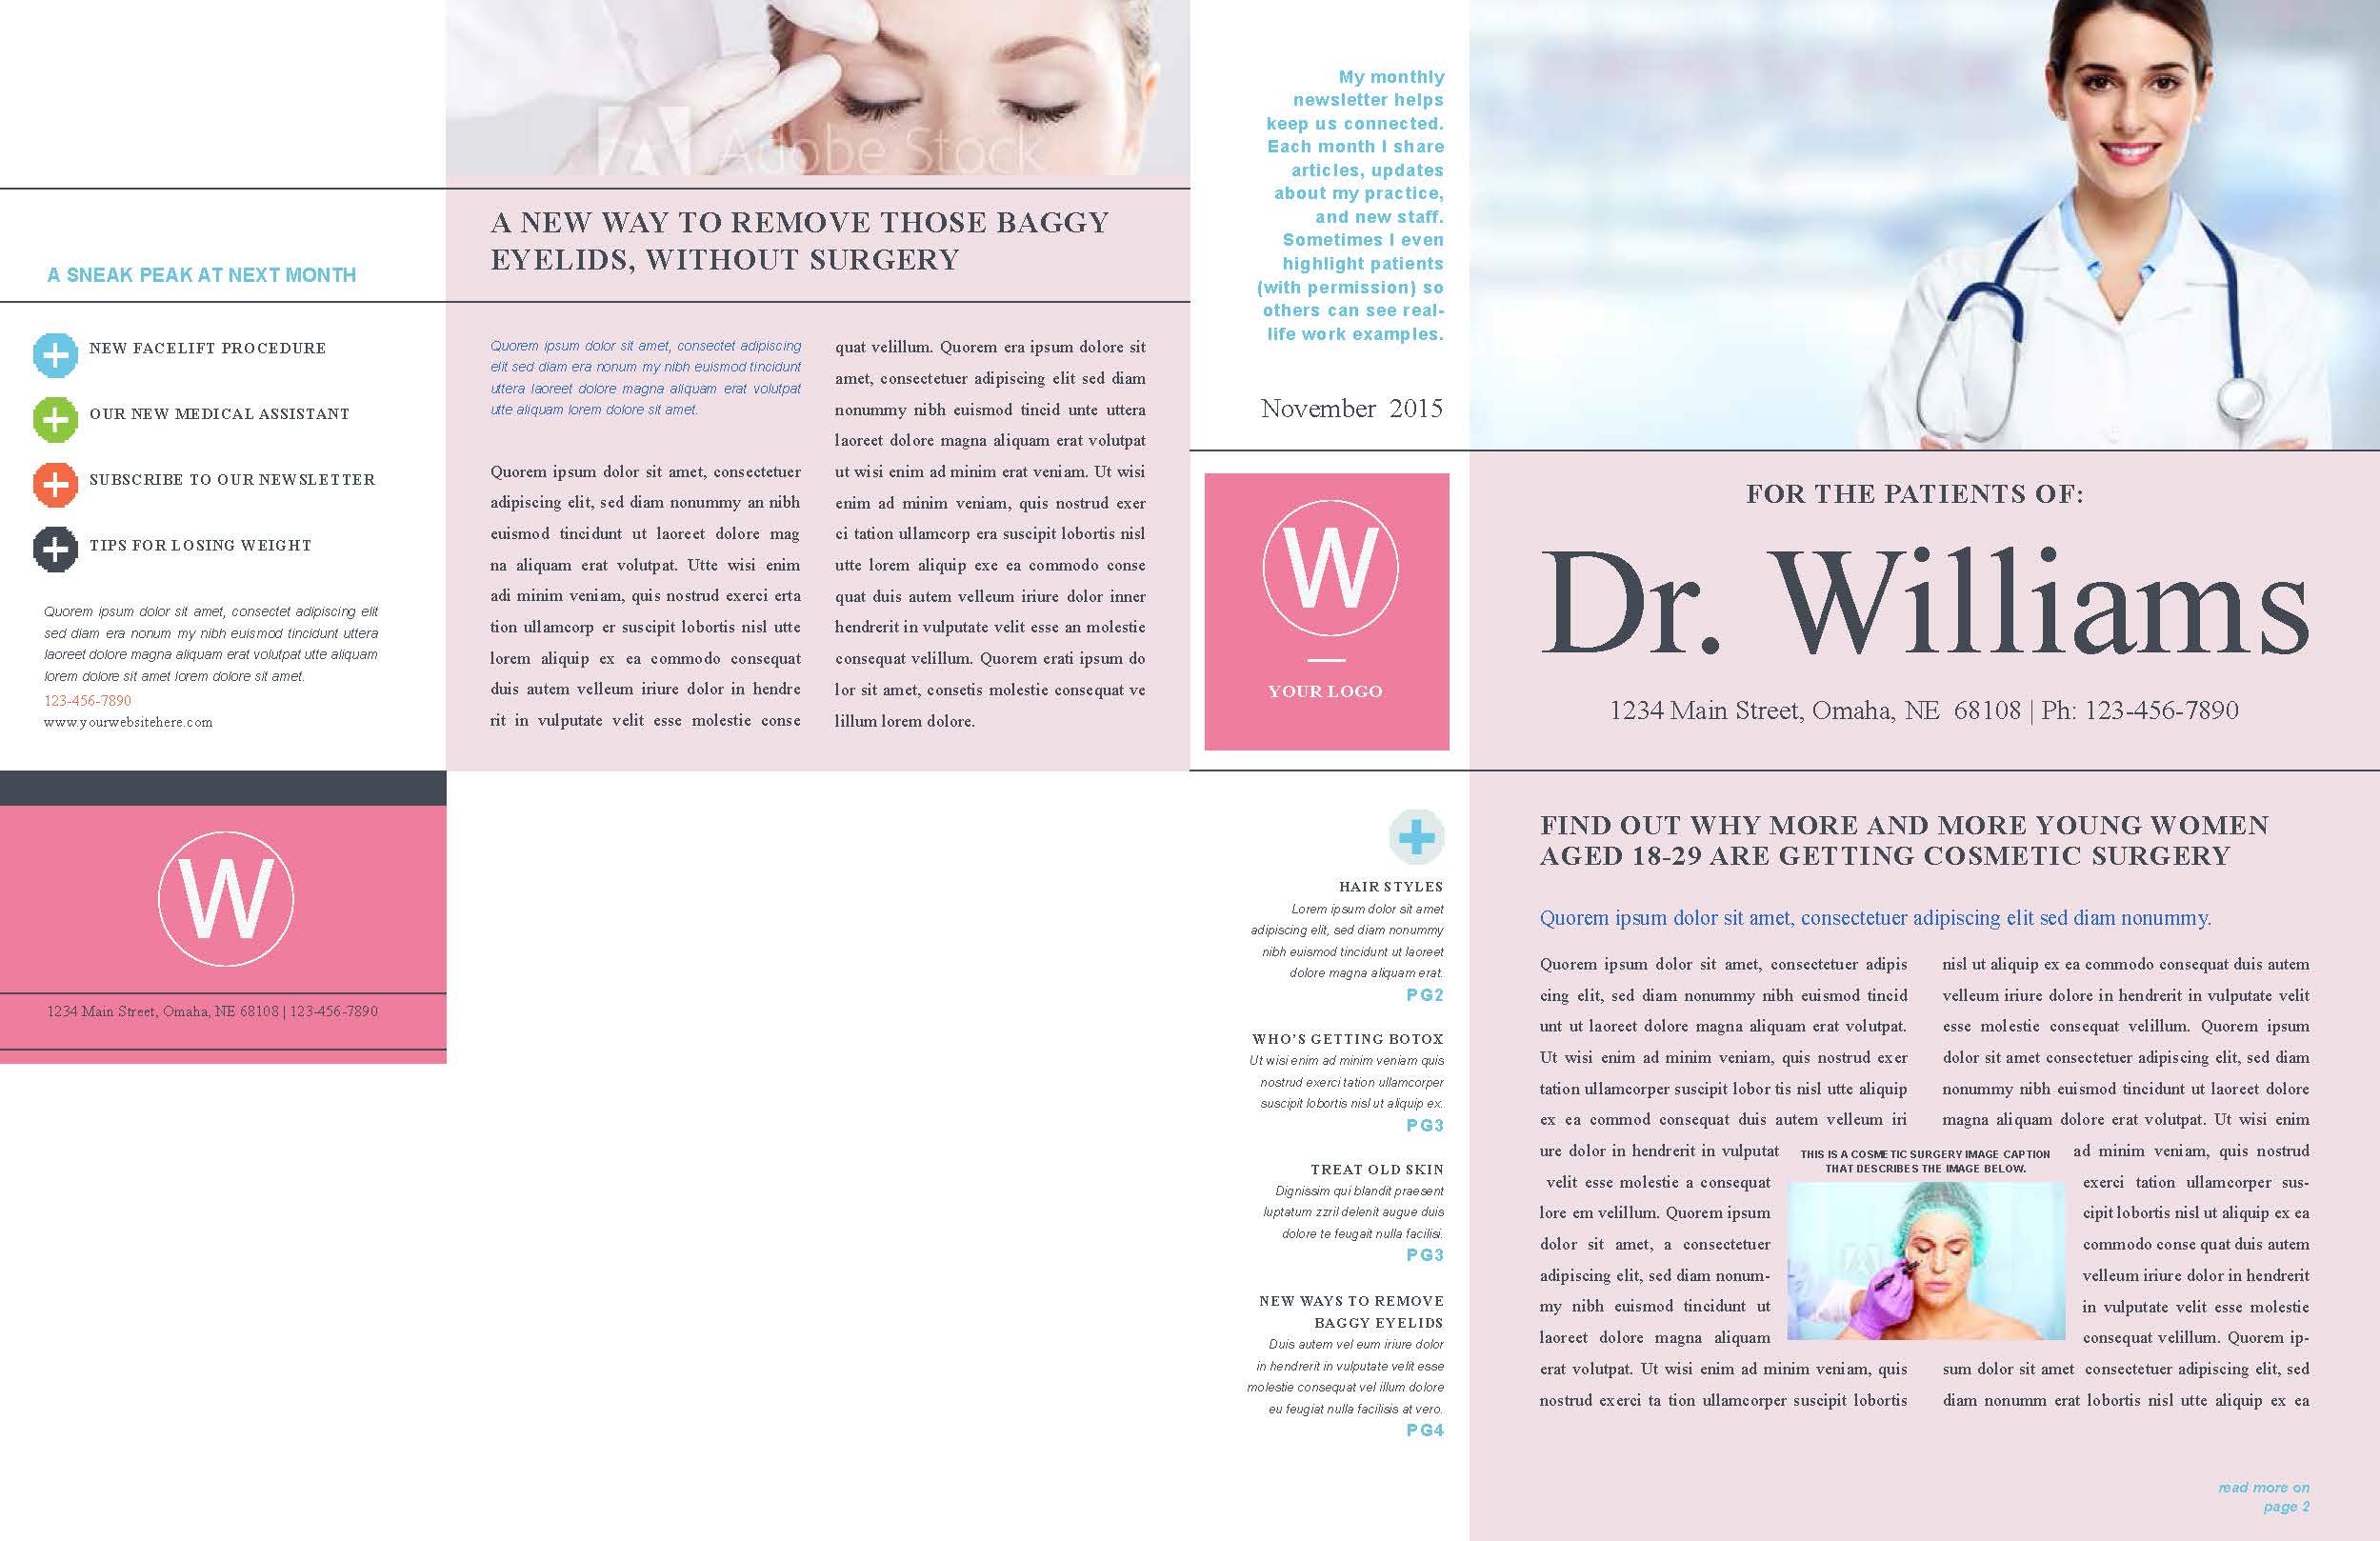 Plastic surgery newsletter pages 1 and 4